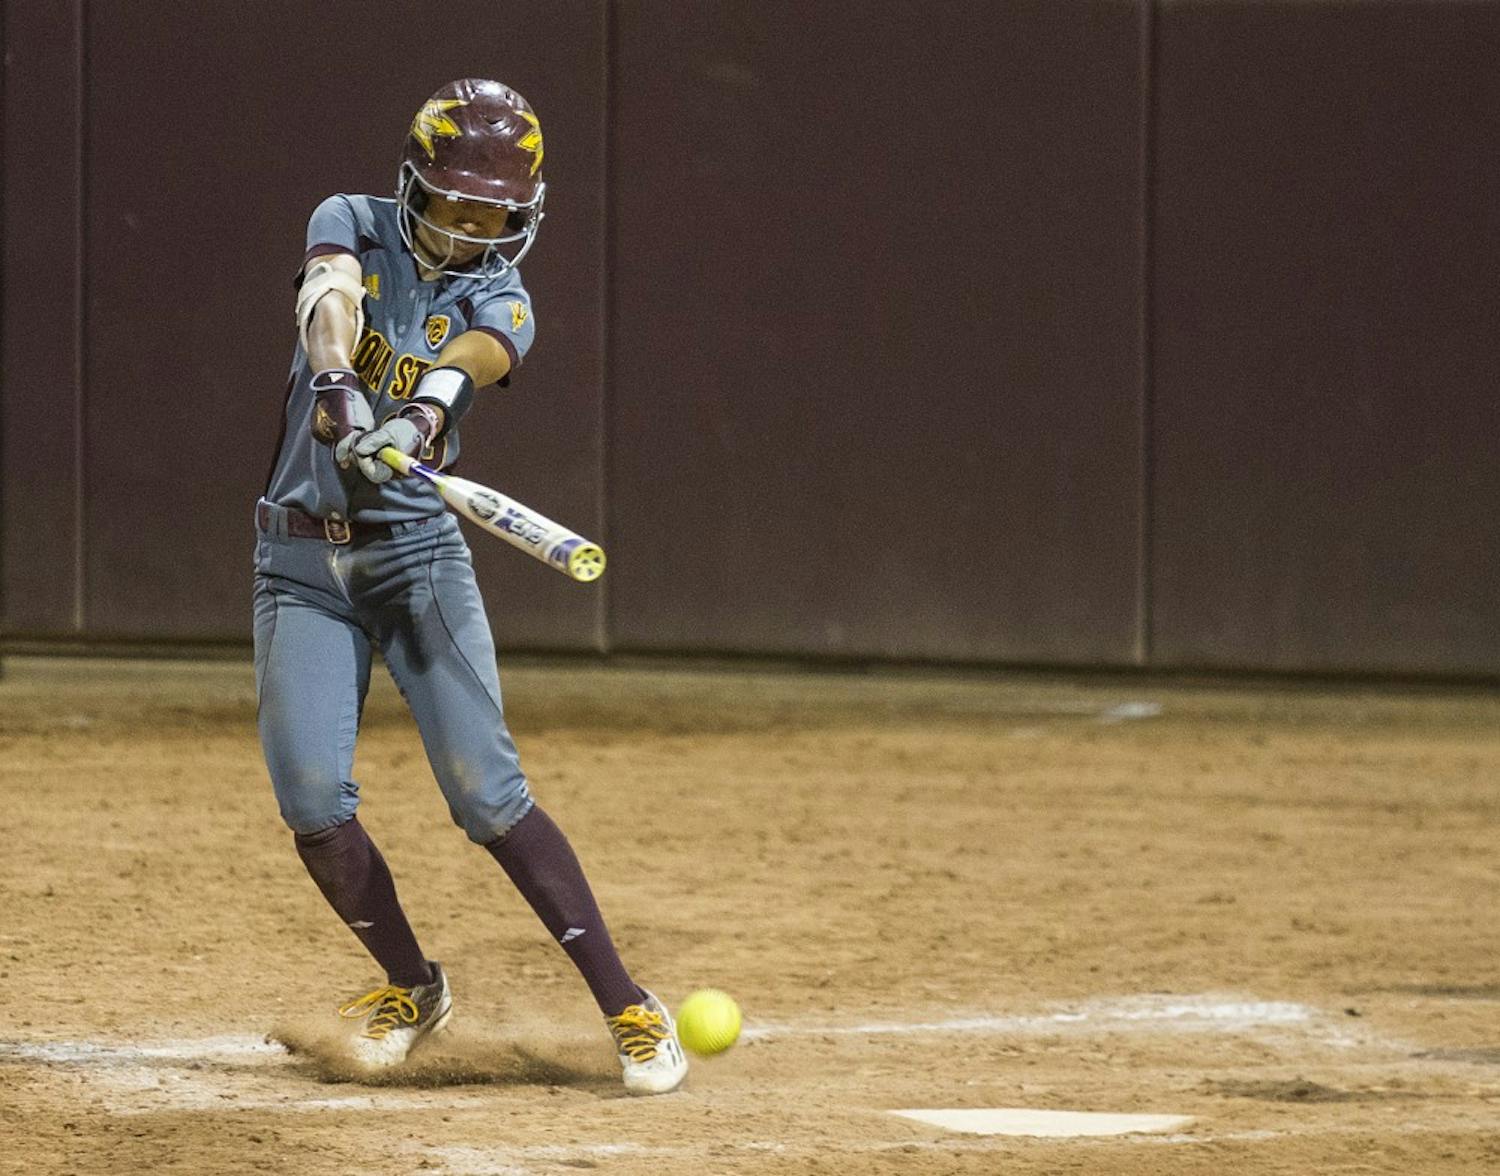 Freshman infielder Taylor Becerra makes contact with the ball during a game against San Diego at Alberta B. Farrington Softball Stadium in Tempe, Arizona, on Sunday, Feb. 14, 2016. The Sun Devils won the game, 9-1.